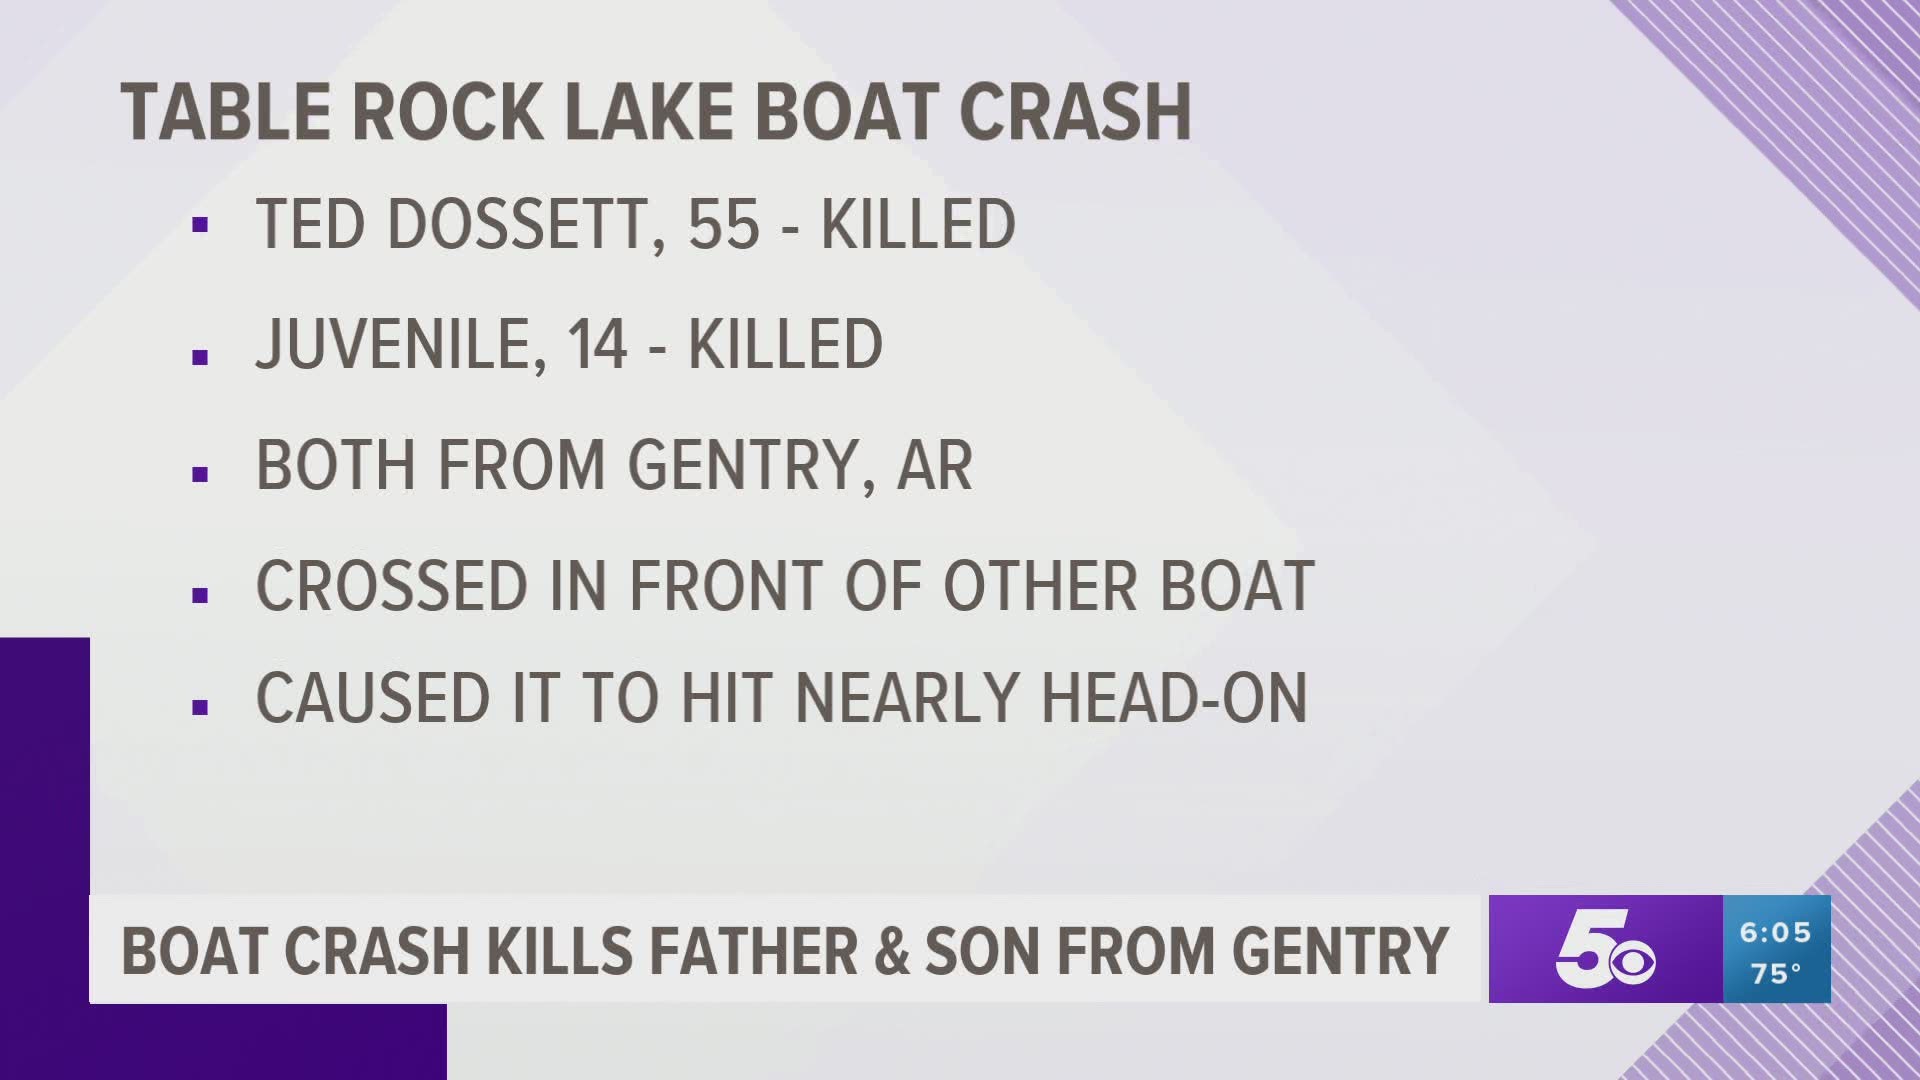 A father and his son from Gentry were killed in a boat crash on Table Rock Lake. https://bit.ly/3hHe6SD